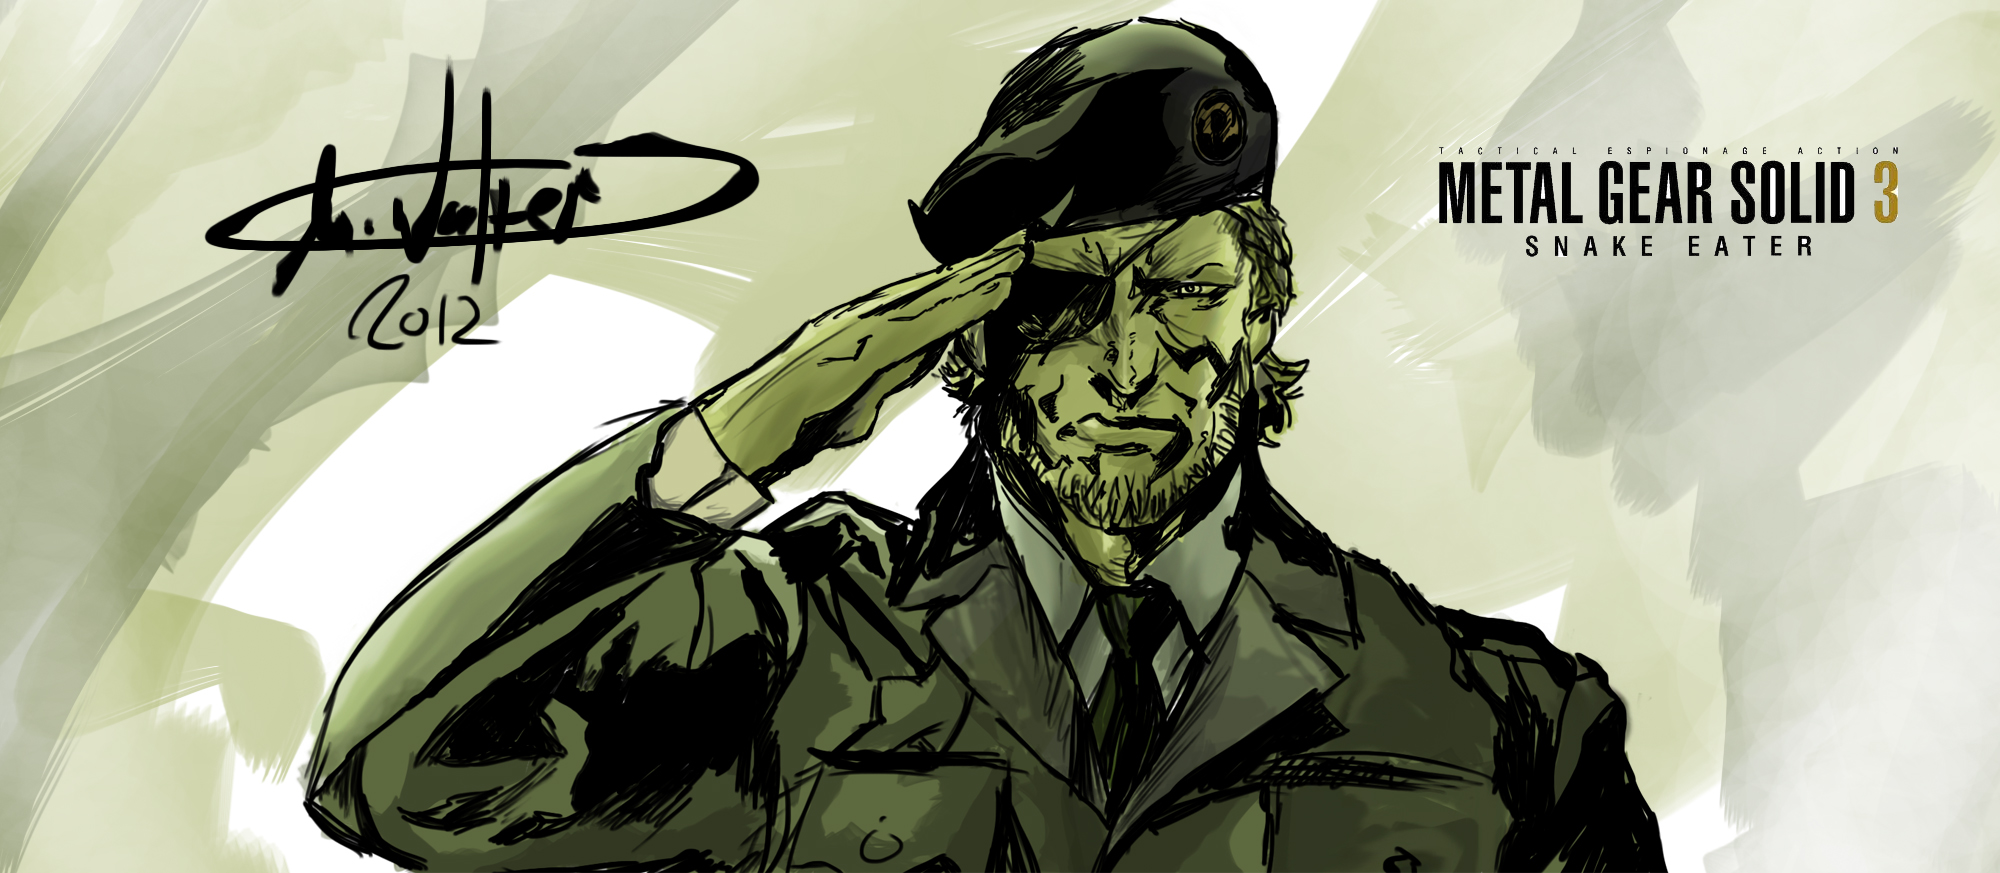 Snake eater Shinkawa style by mikewalters on